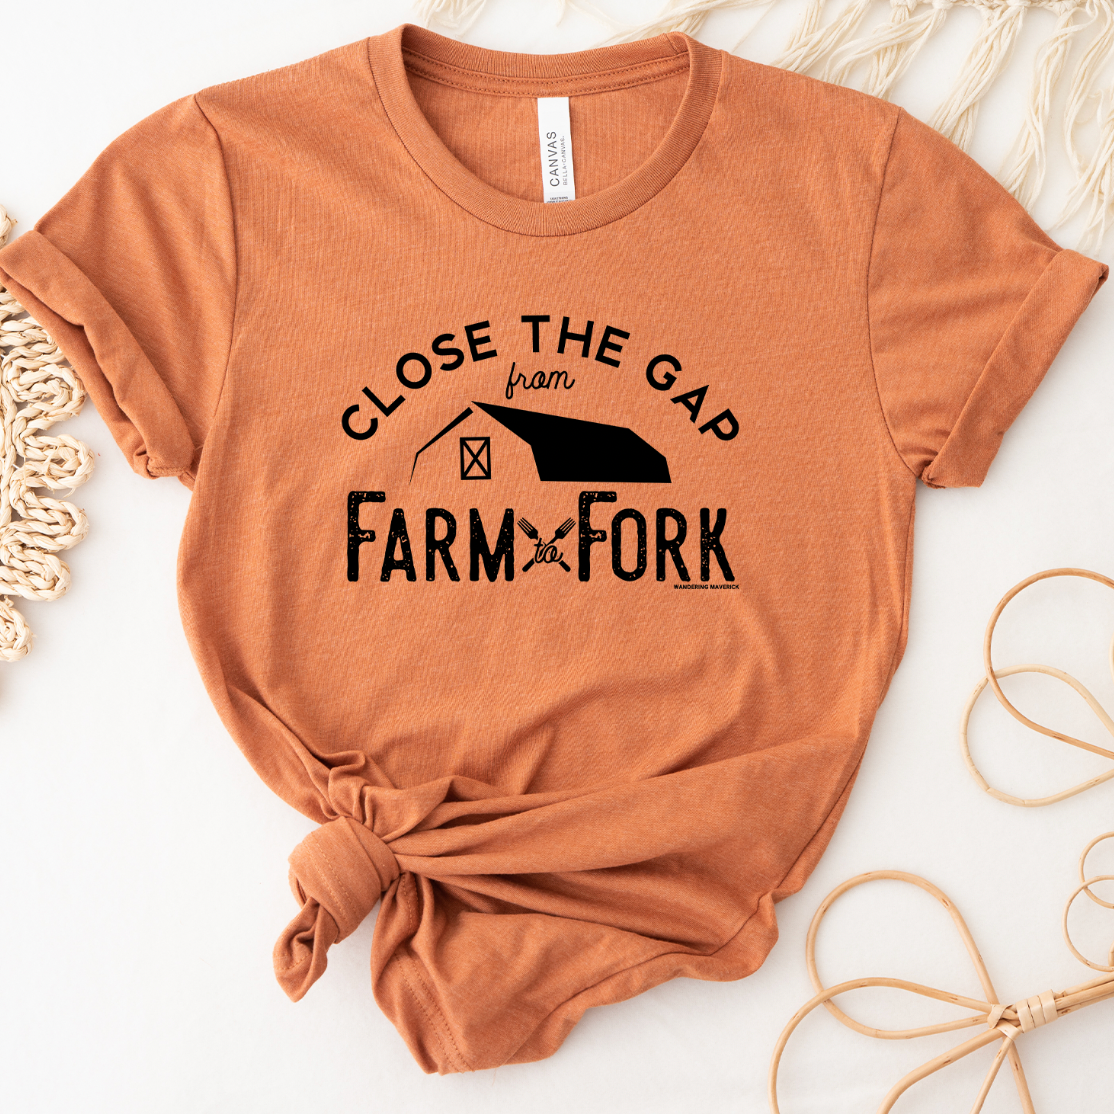 Close The Gap From Farm to Fork T-Shirt (XS-4XL) - Multiple Colors!